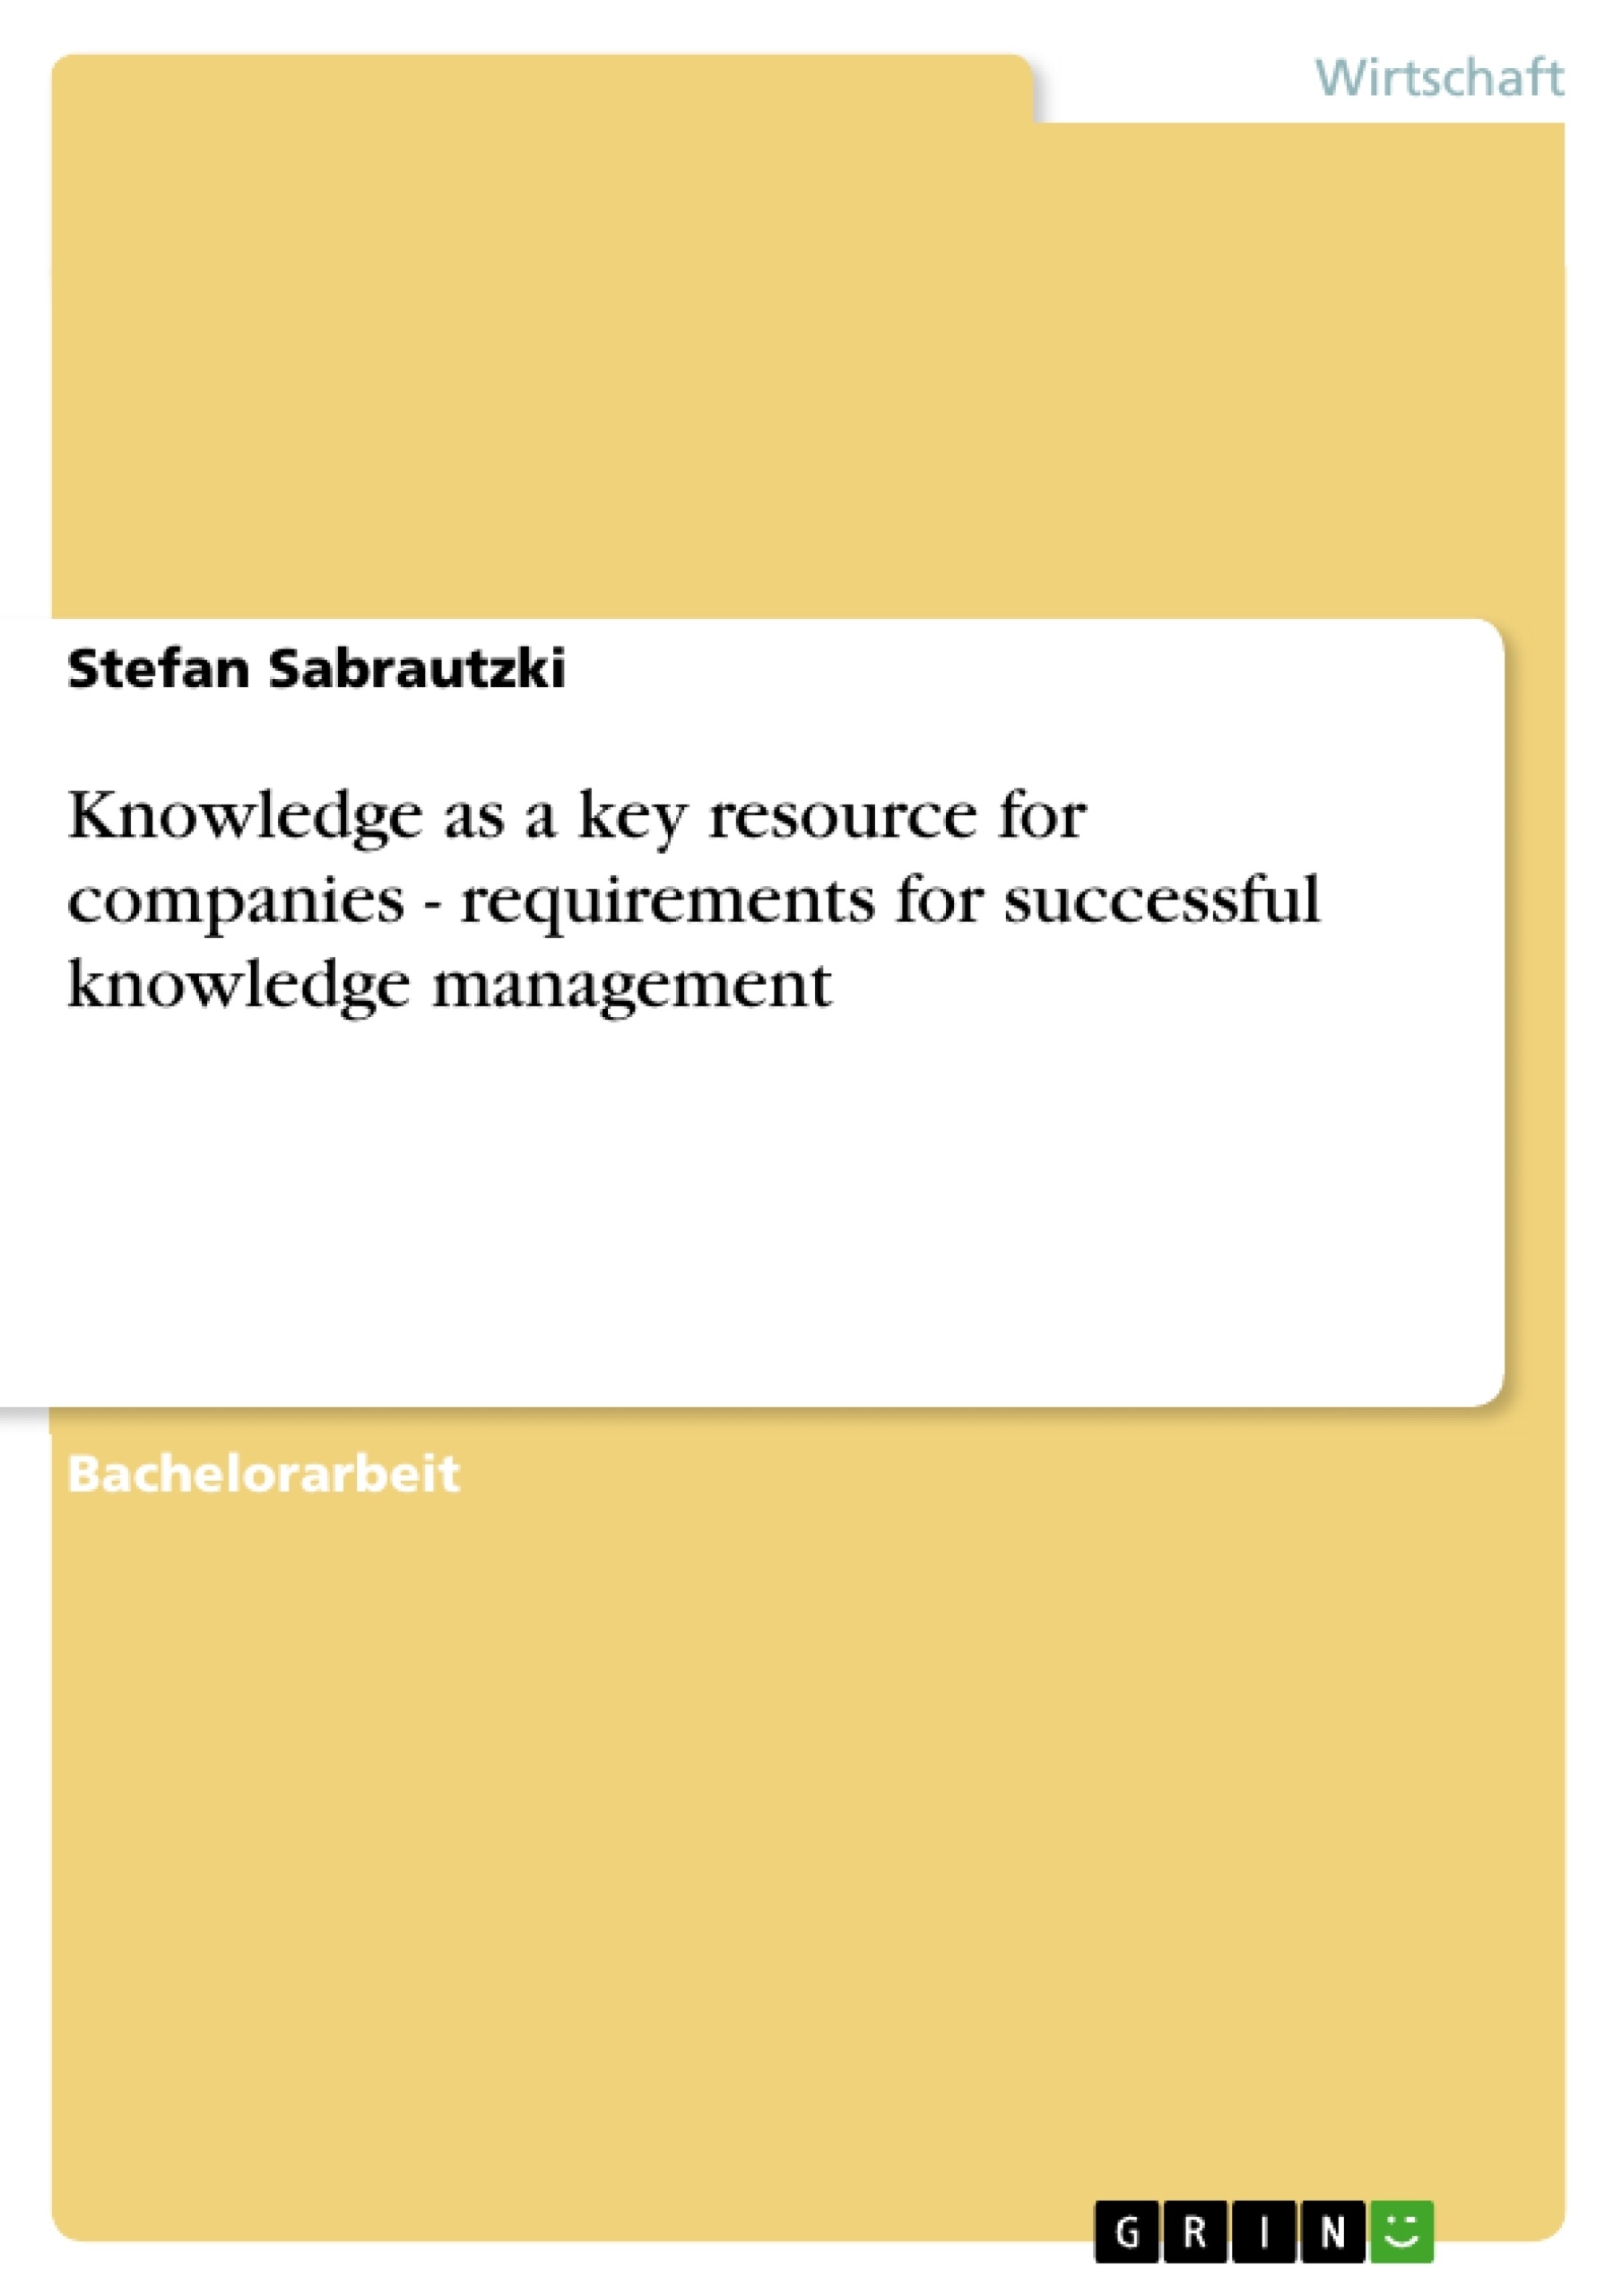 Titel: Knowledge as a key resource for companies - requirements for successful knowledge management